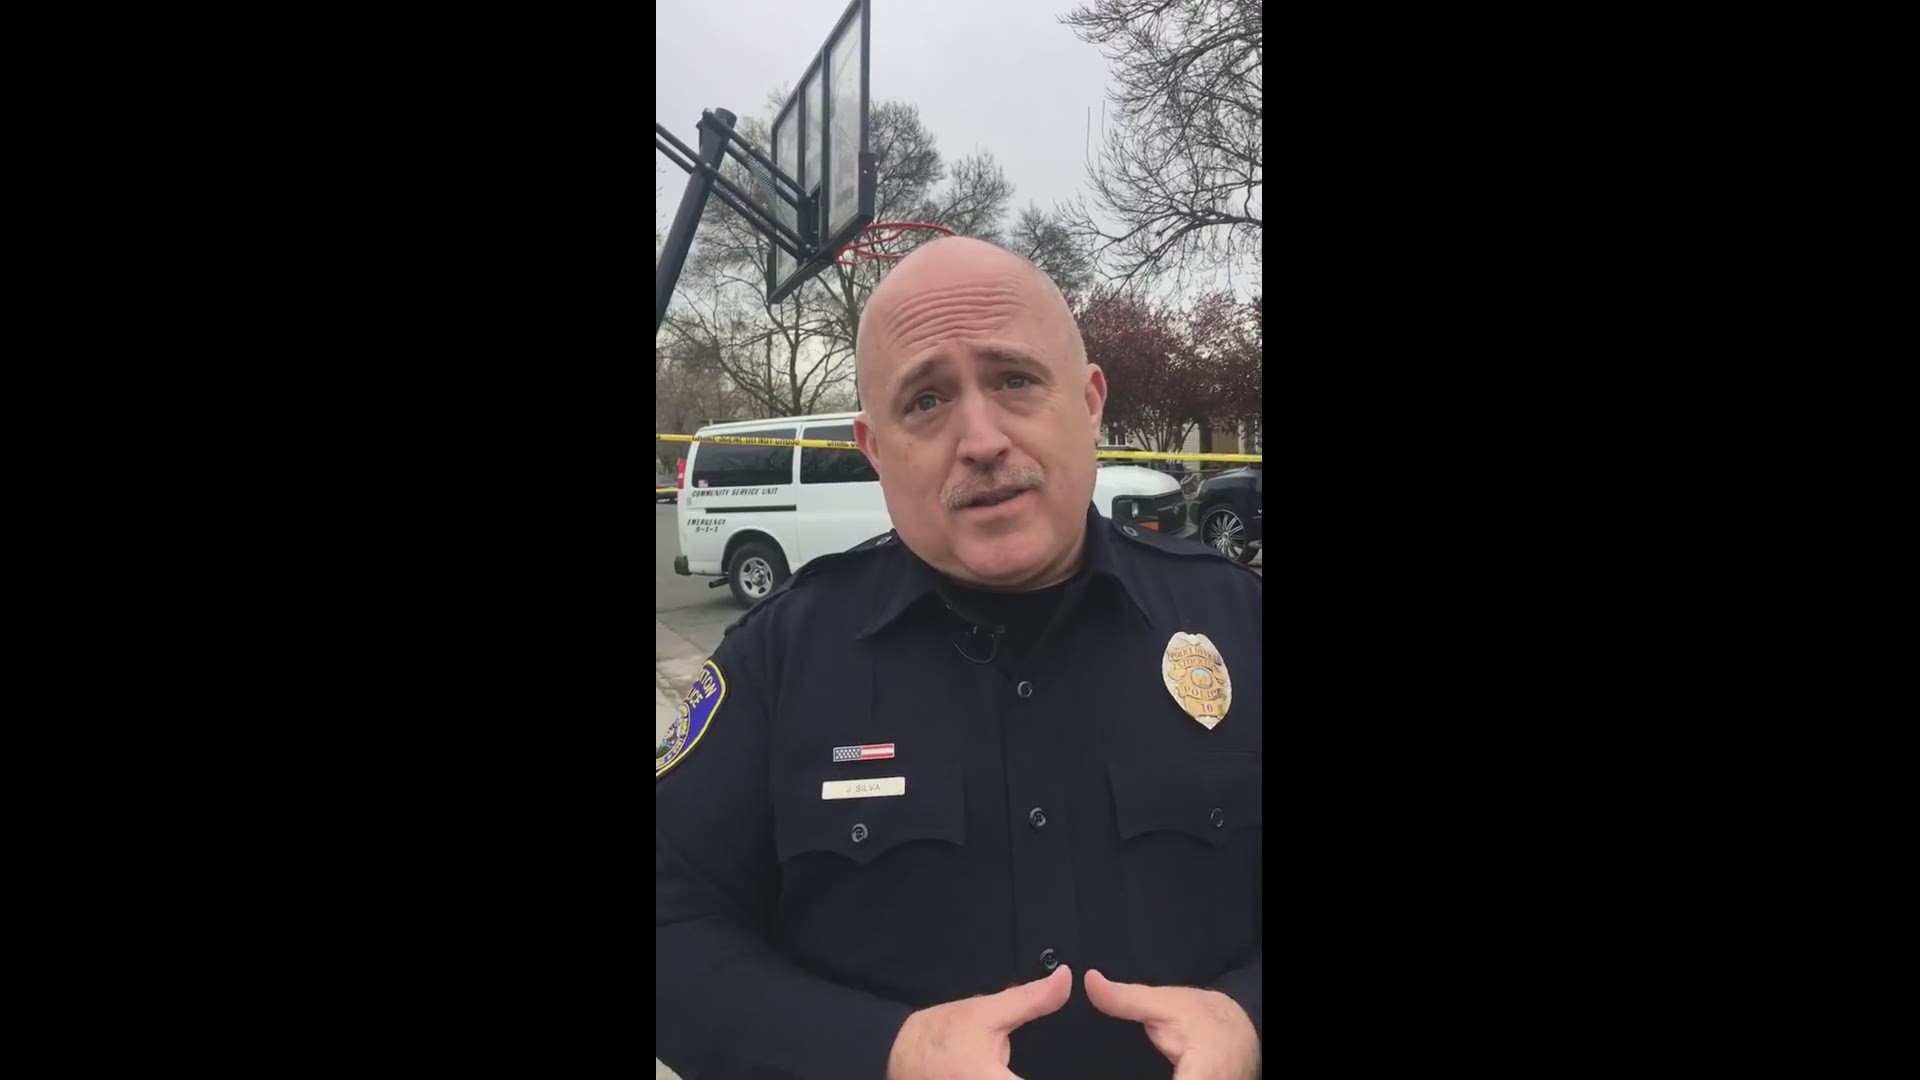 ‪Officer Joe Silva with Stockton Police Department talks about the triple homicide near F Street and Finland Avenue late Thursday night. Three people, two men and a woman, were killed in a shooting. Two were killed in a car, another was taken to the hospital in critical condition where he later died.